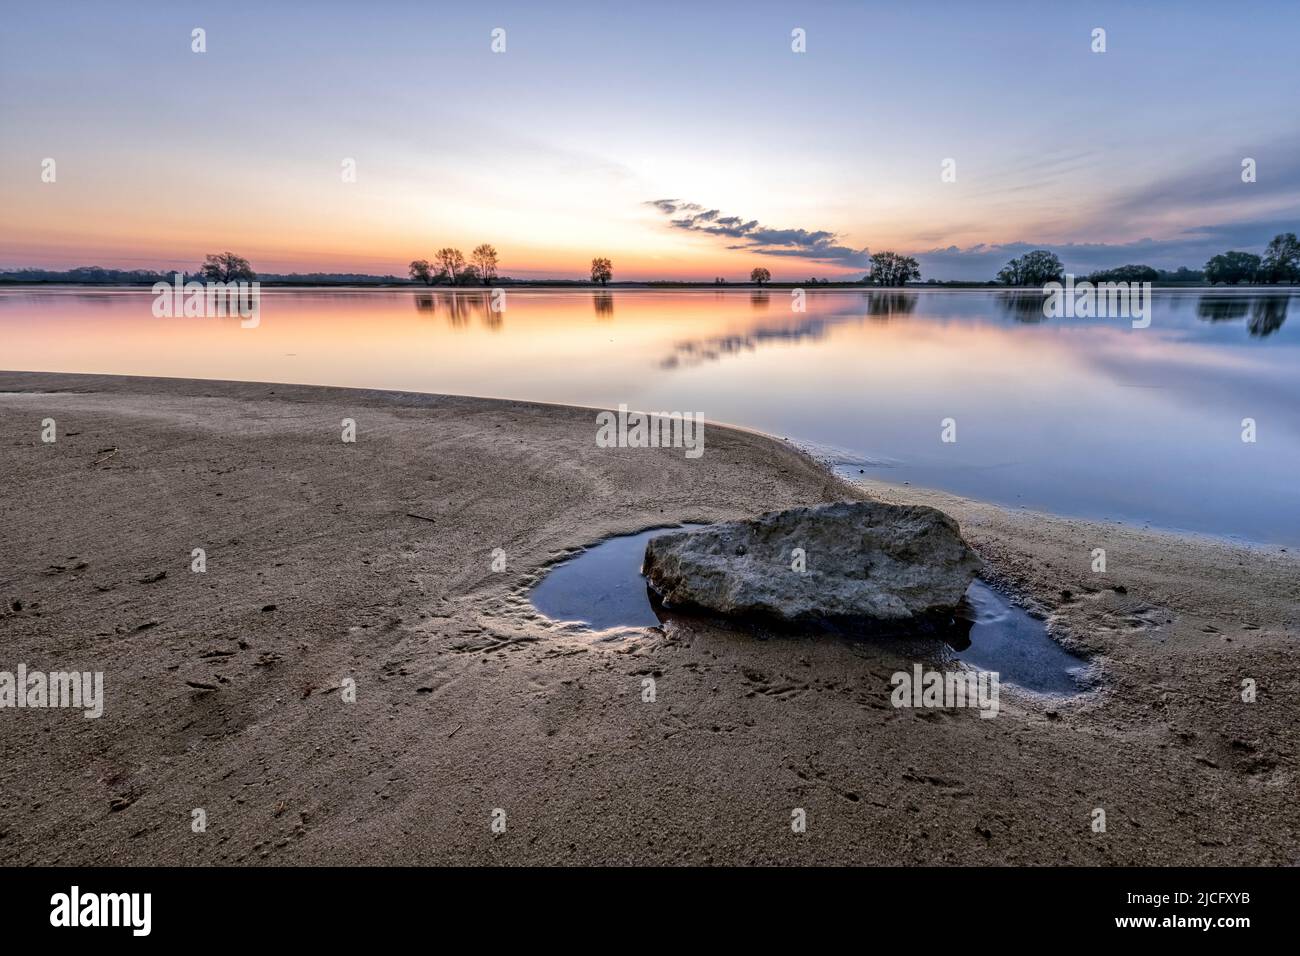 The Elbe with a reflection and a stone on the beach at sunrise Stock Photo